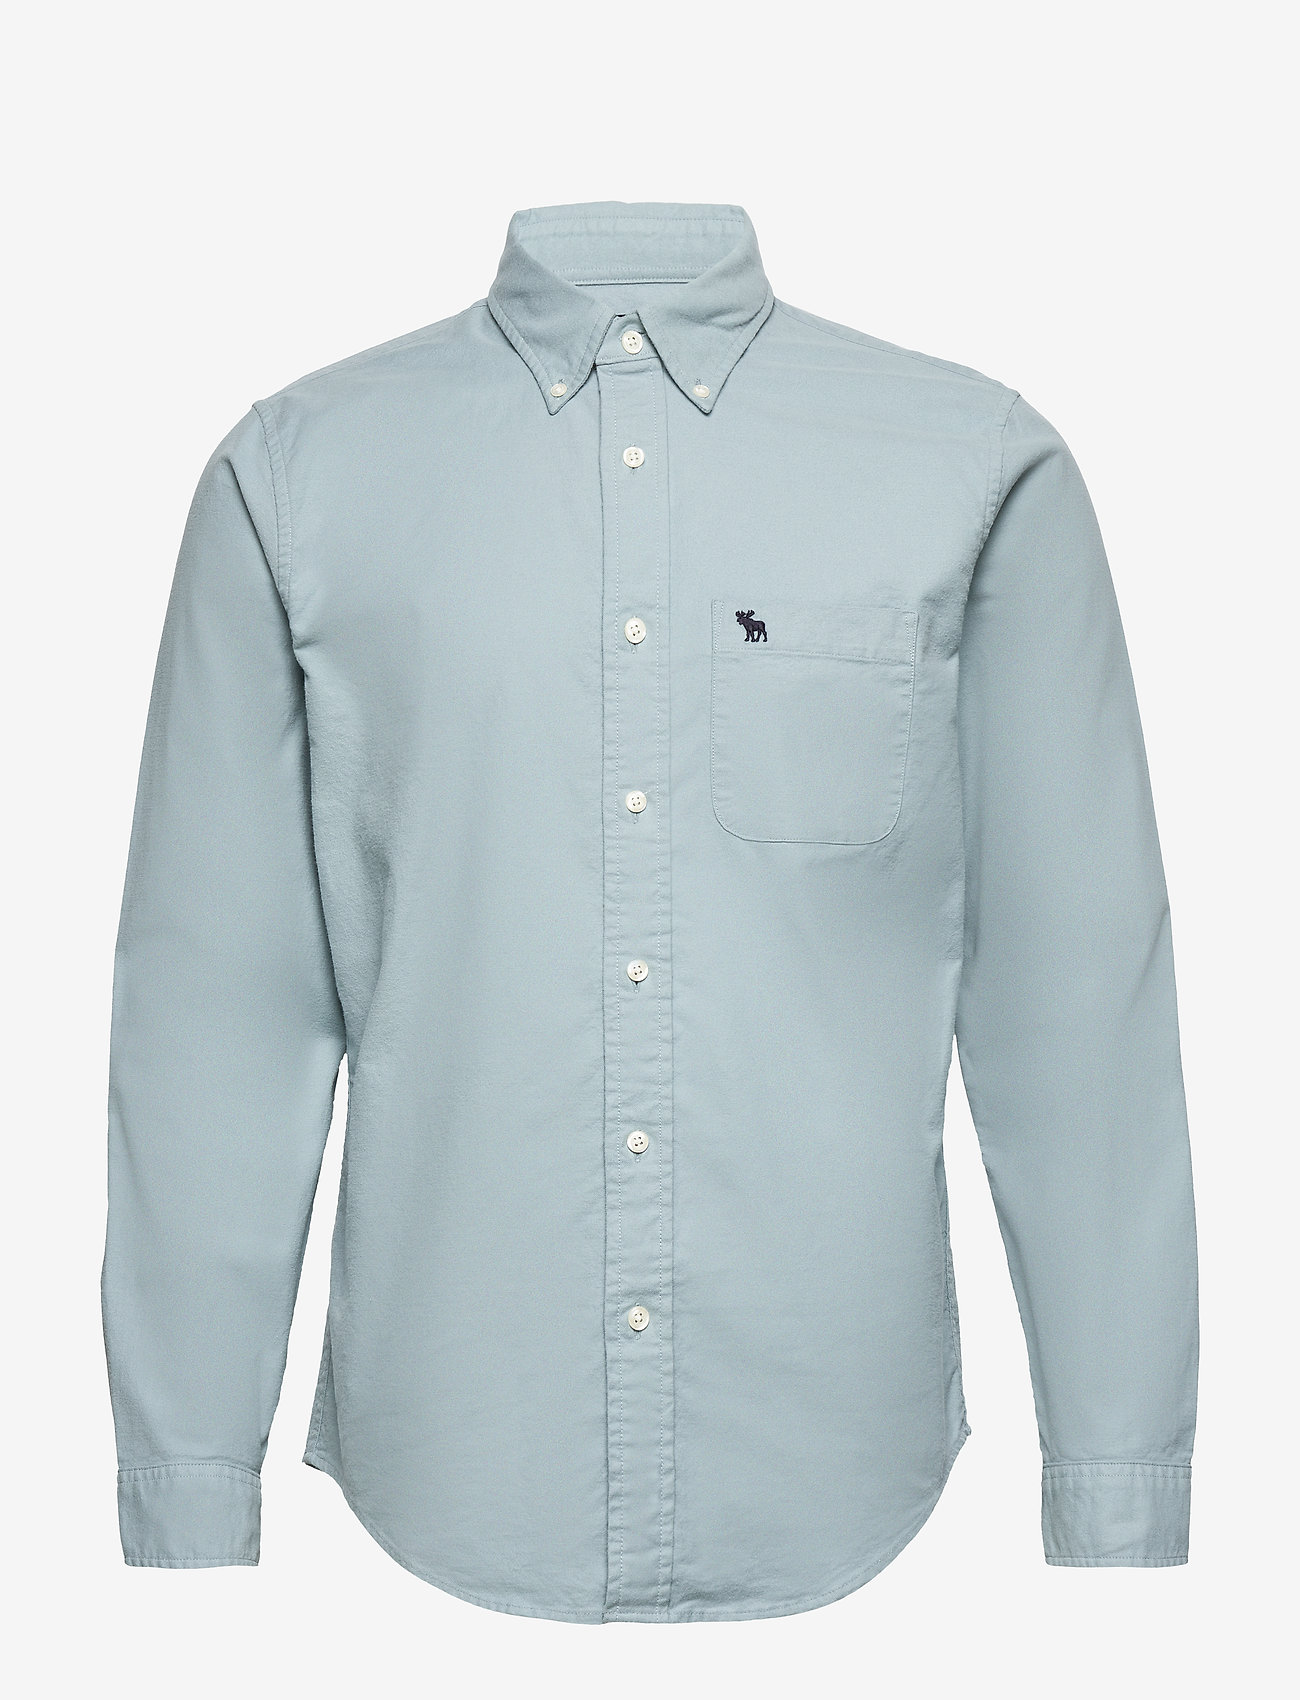 abercrombie button up shirt